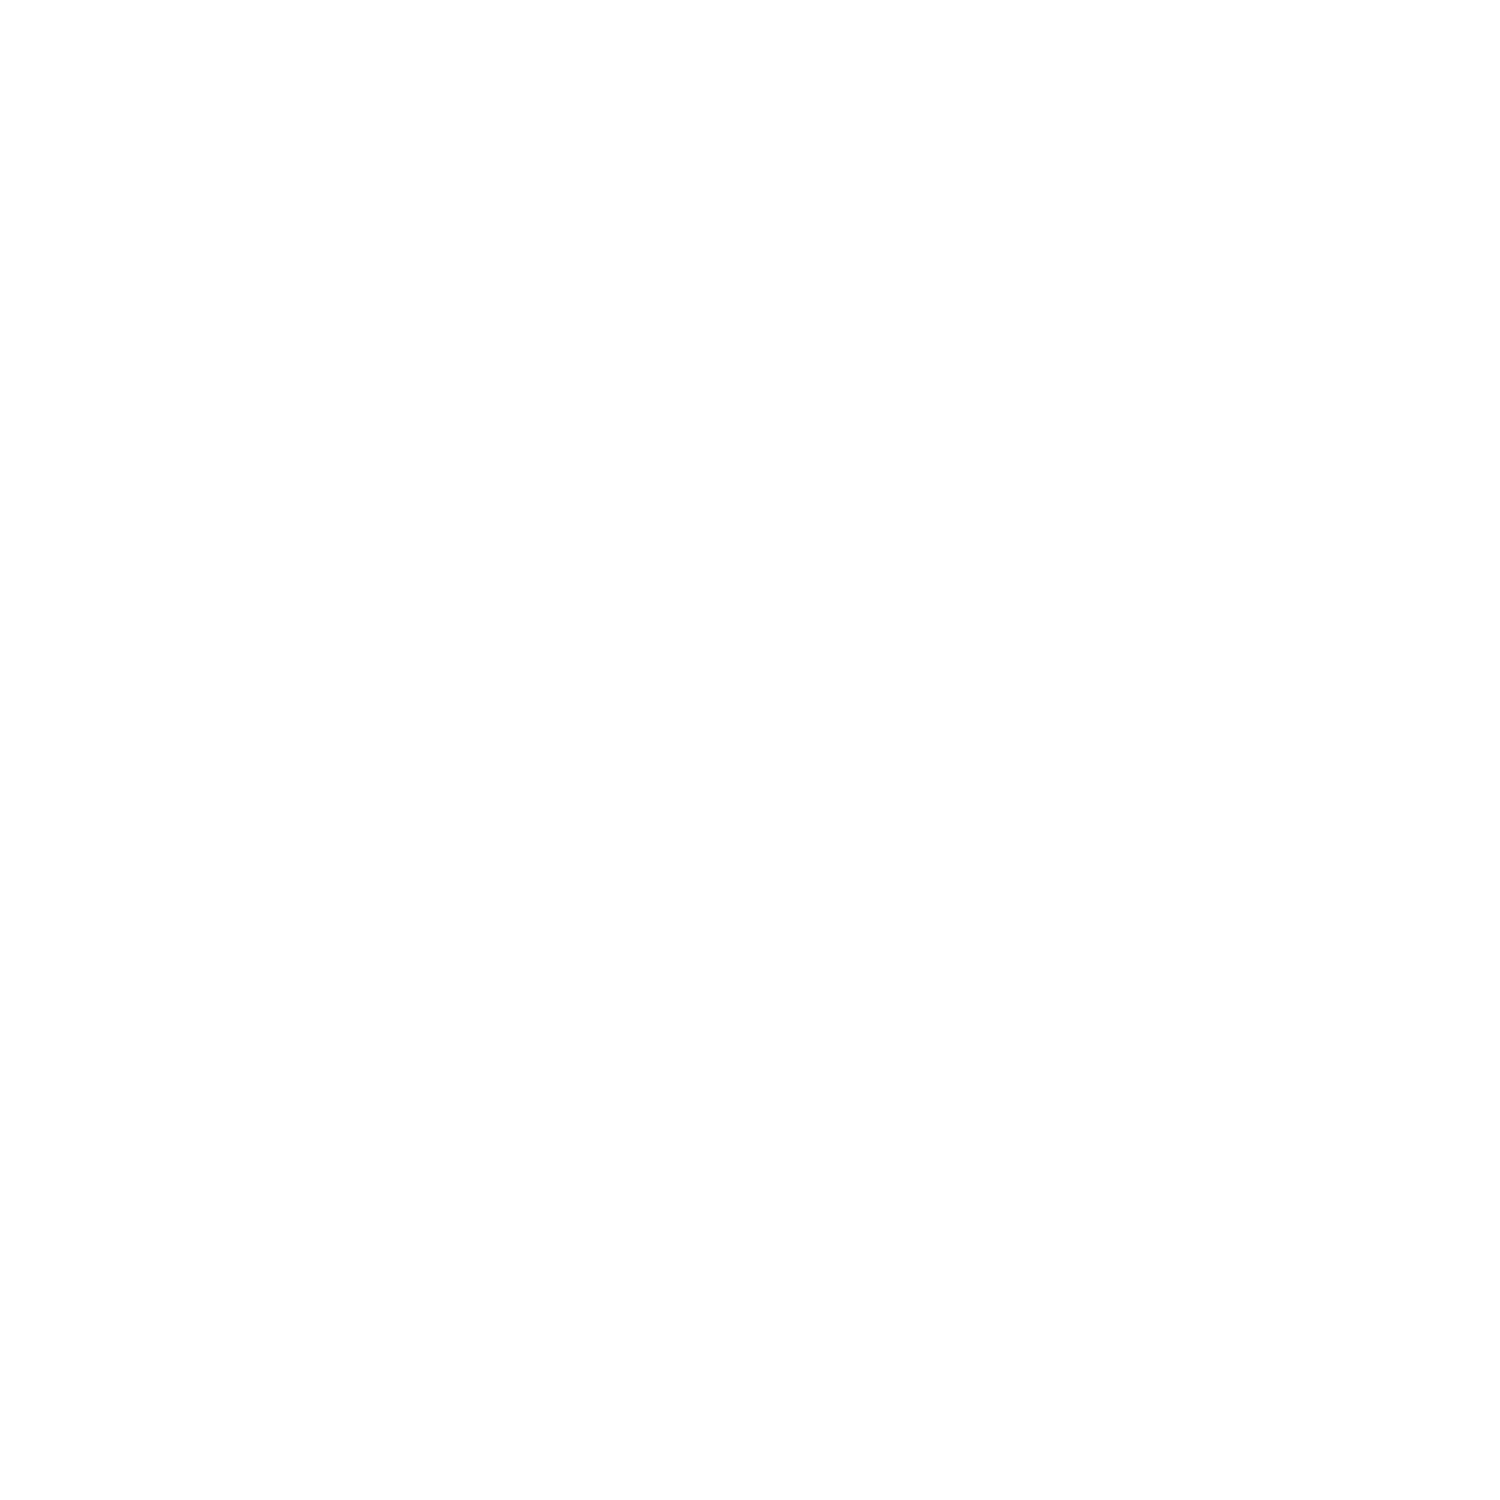 Linden Group Architects